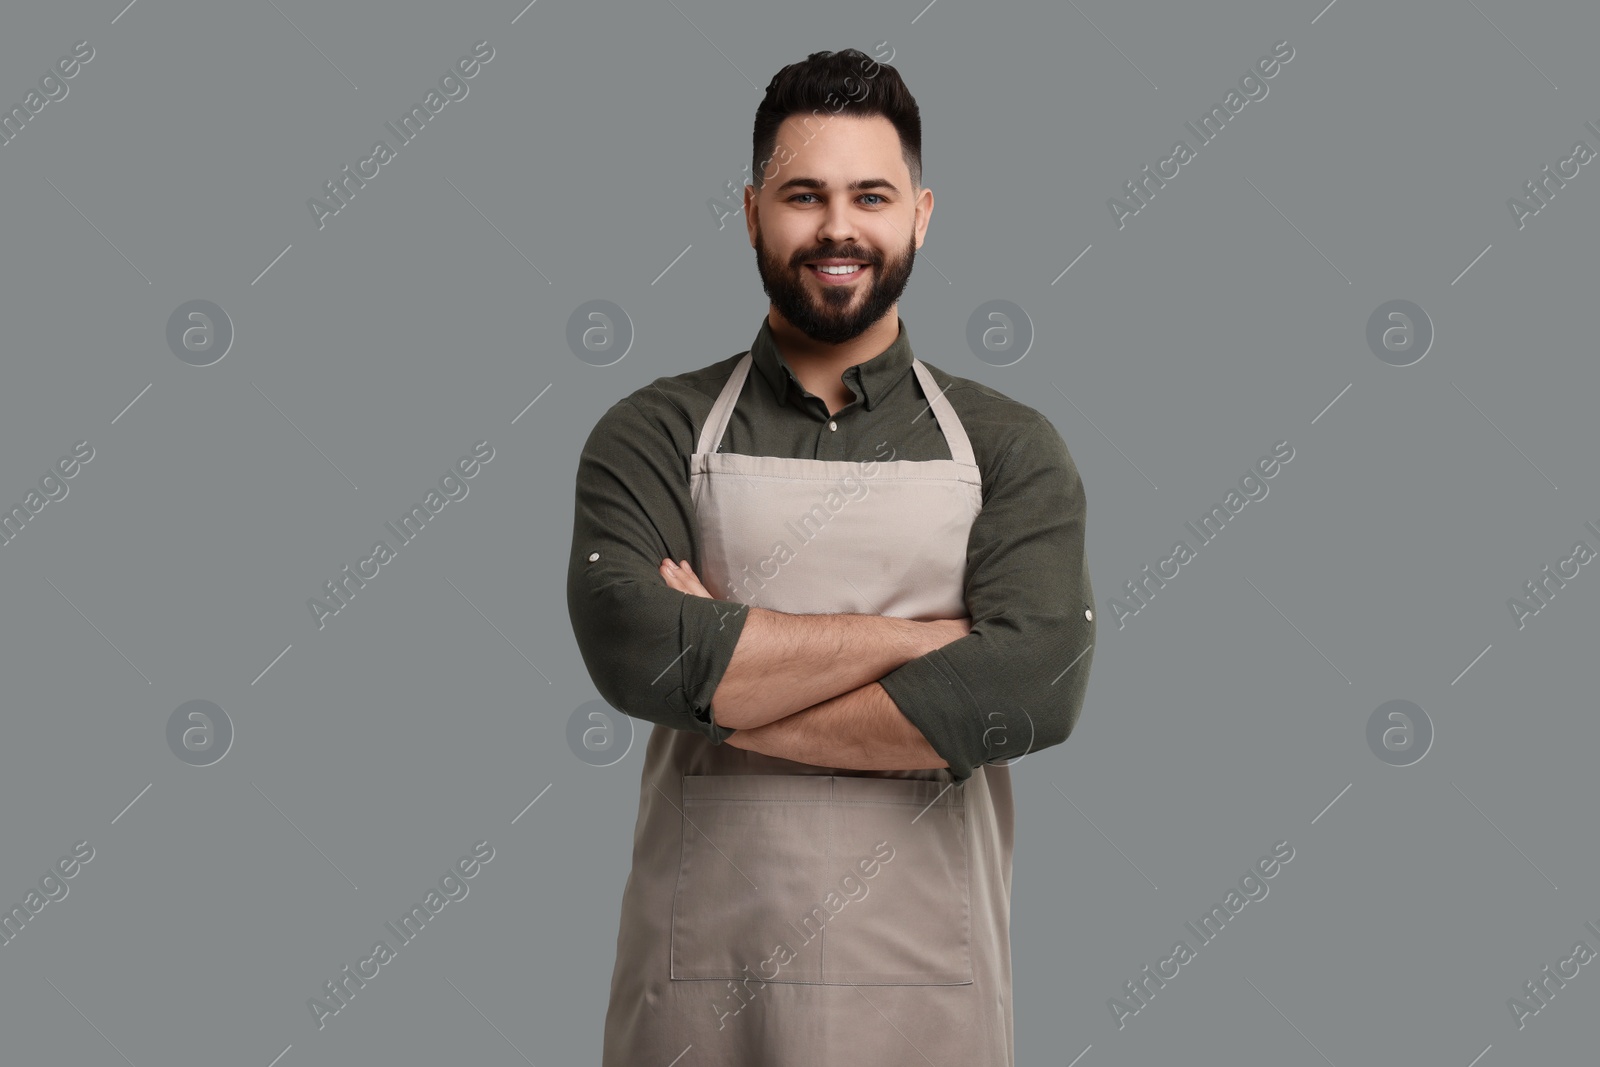 Photo of Smiling man in kitchen apron with crossed arms on grey background. Mockup for design